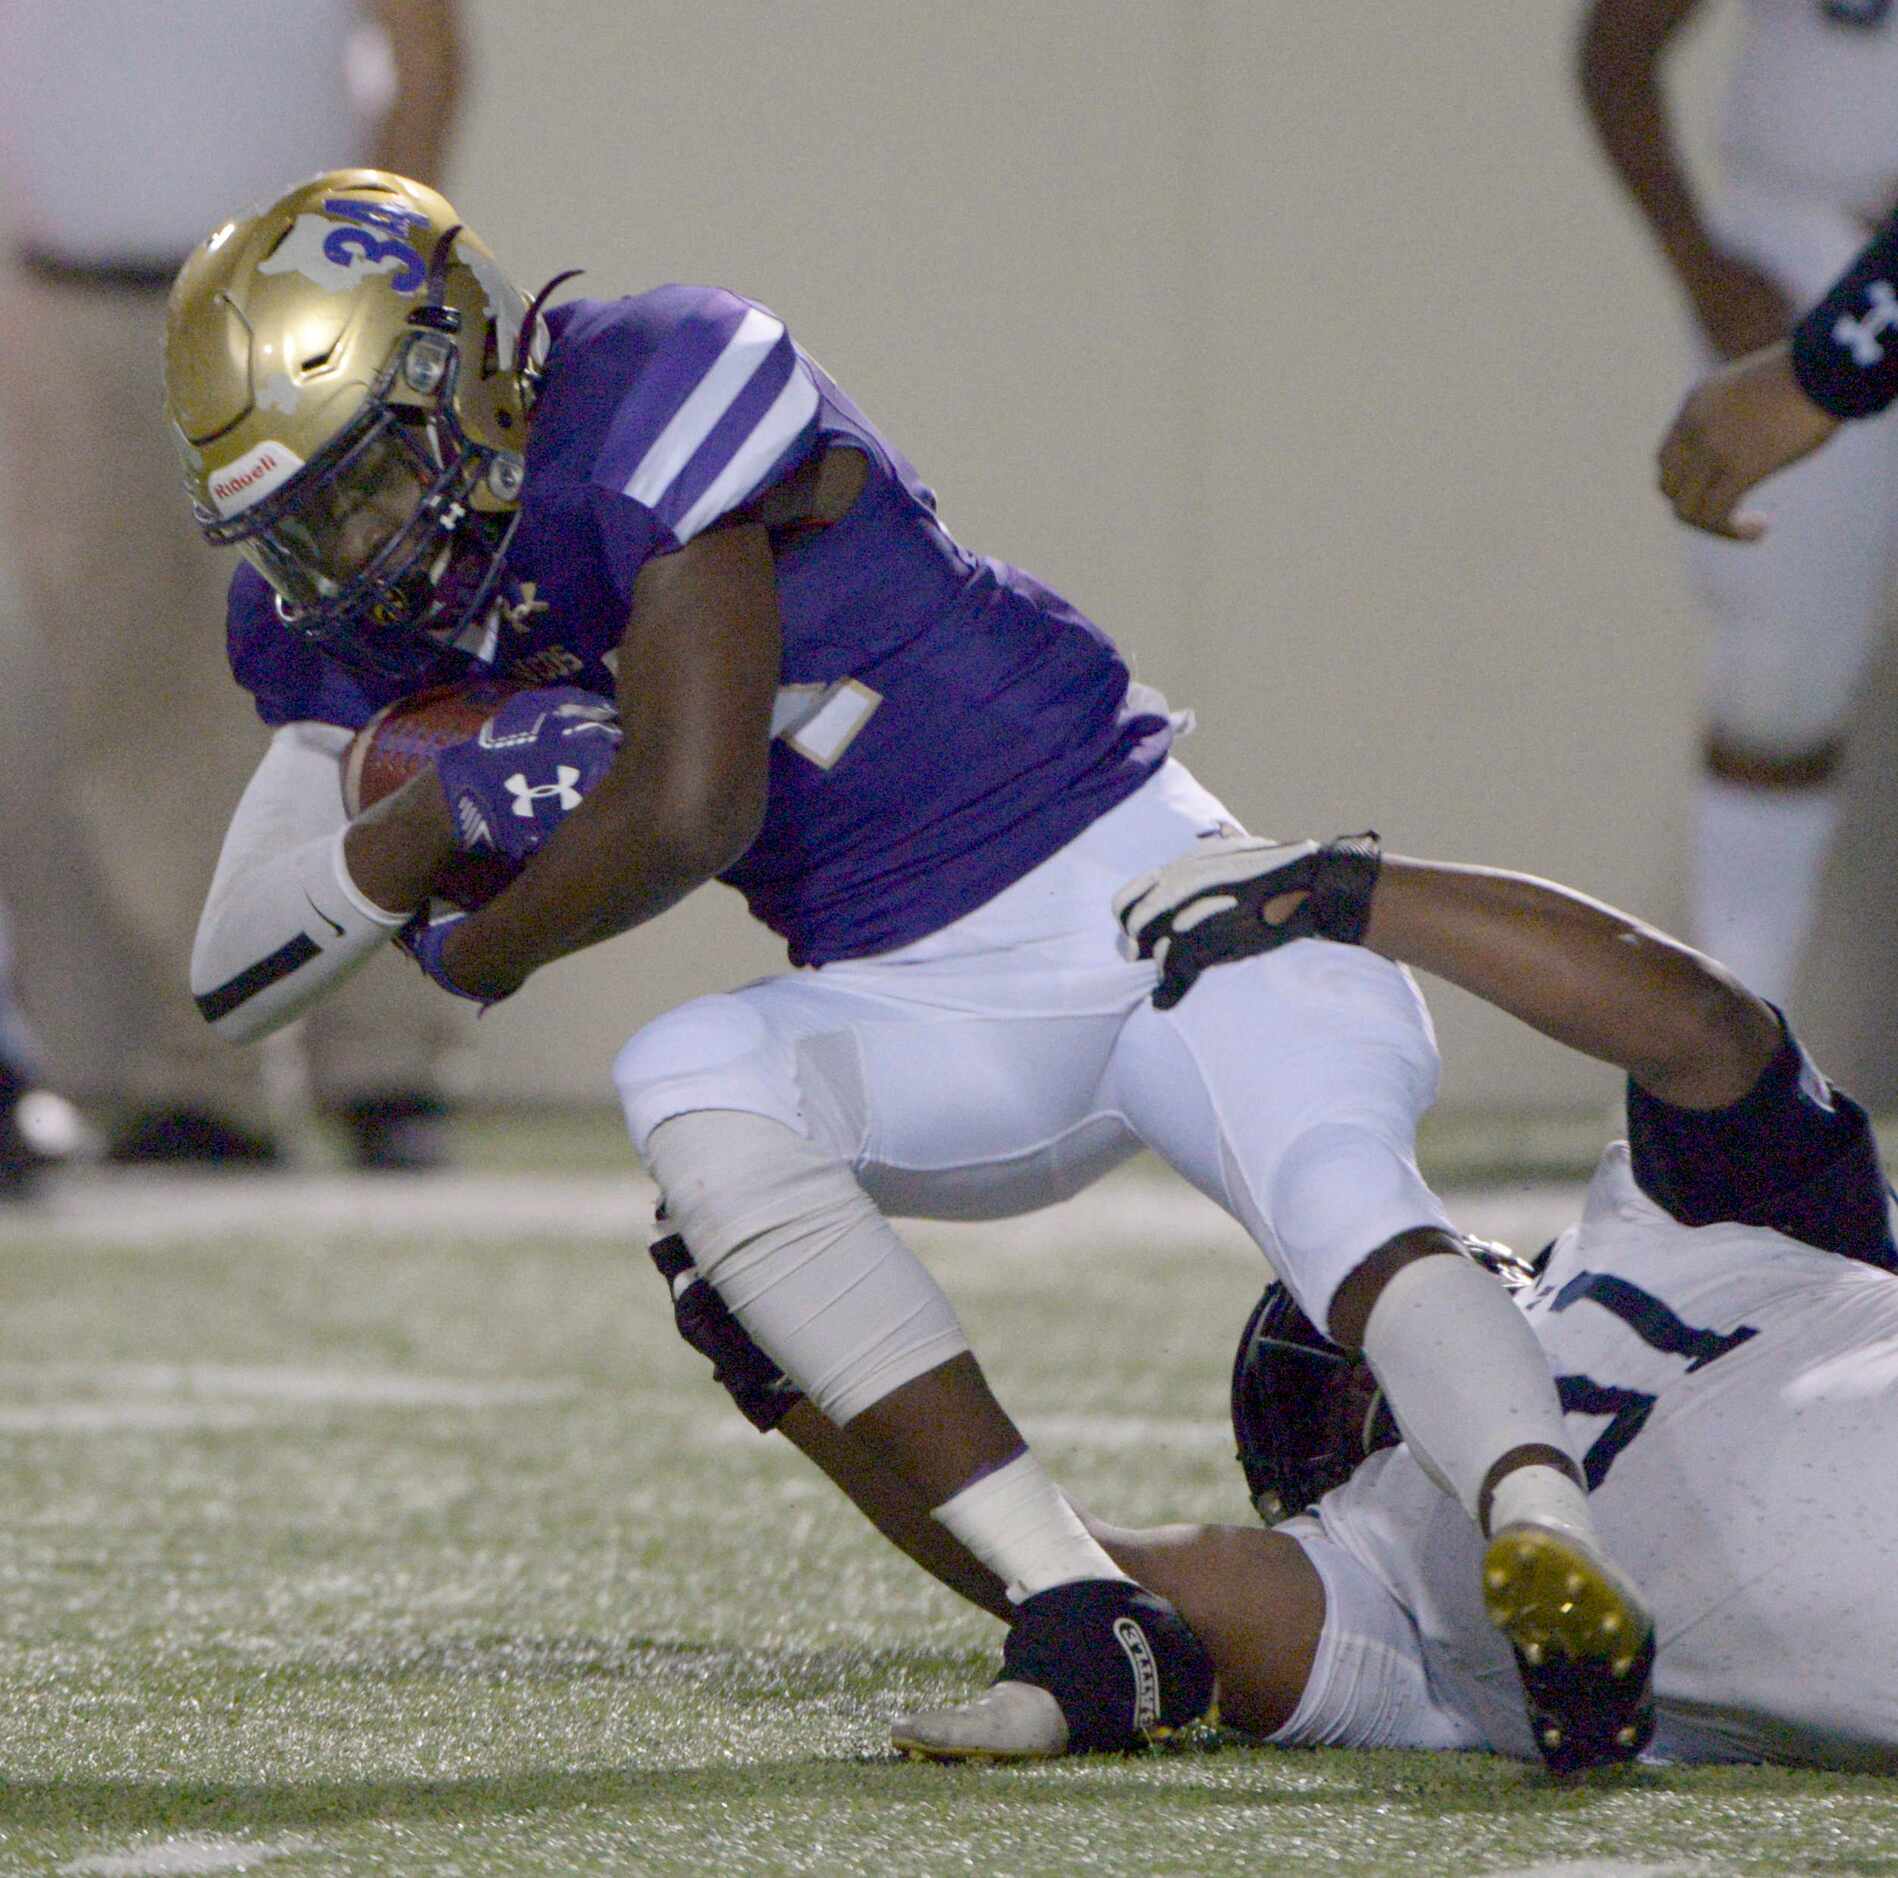 Lone Star’s David Ngegwe (61) tackles Denton’s Coco Brown (34) in the first quarter of a...